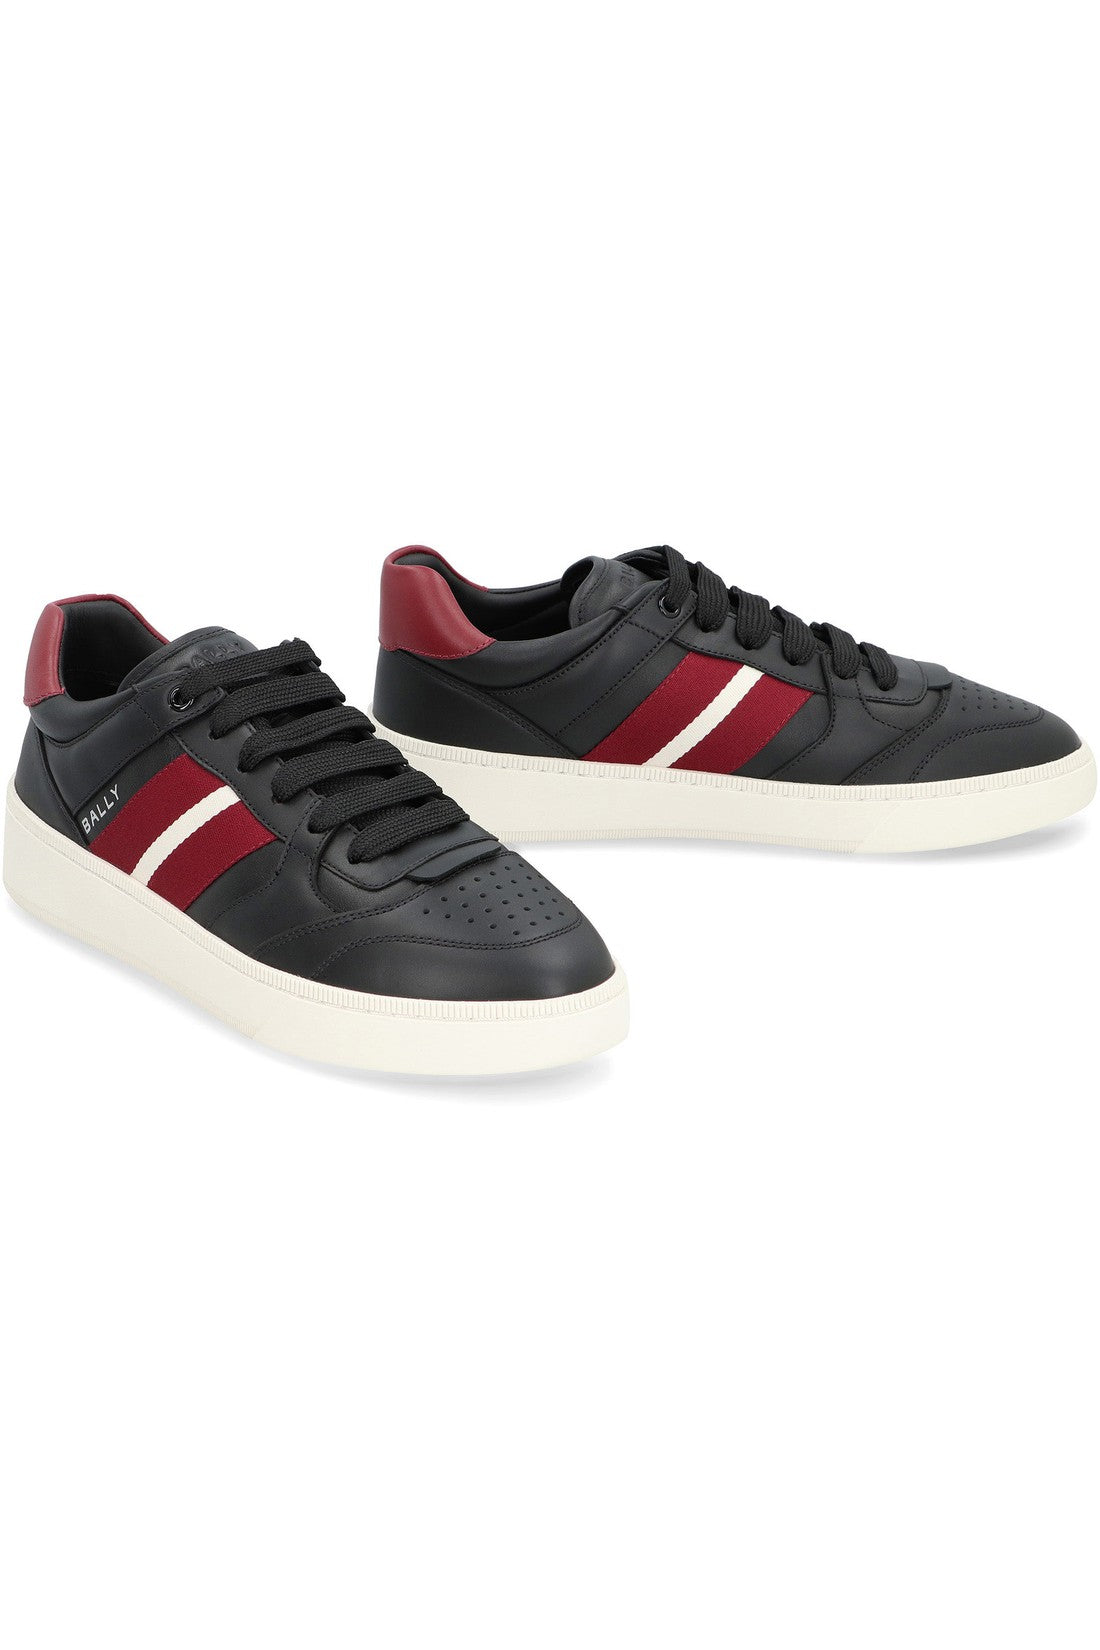 Bally-OUTLET-SALE-Rebby Leather low-top sneakers-ARCHIVIST